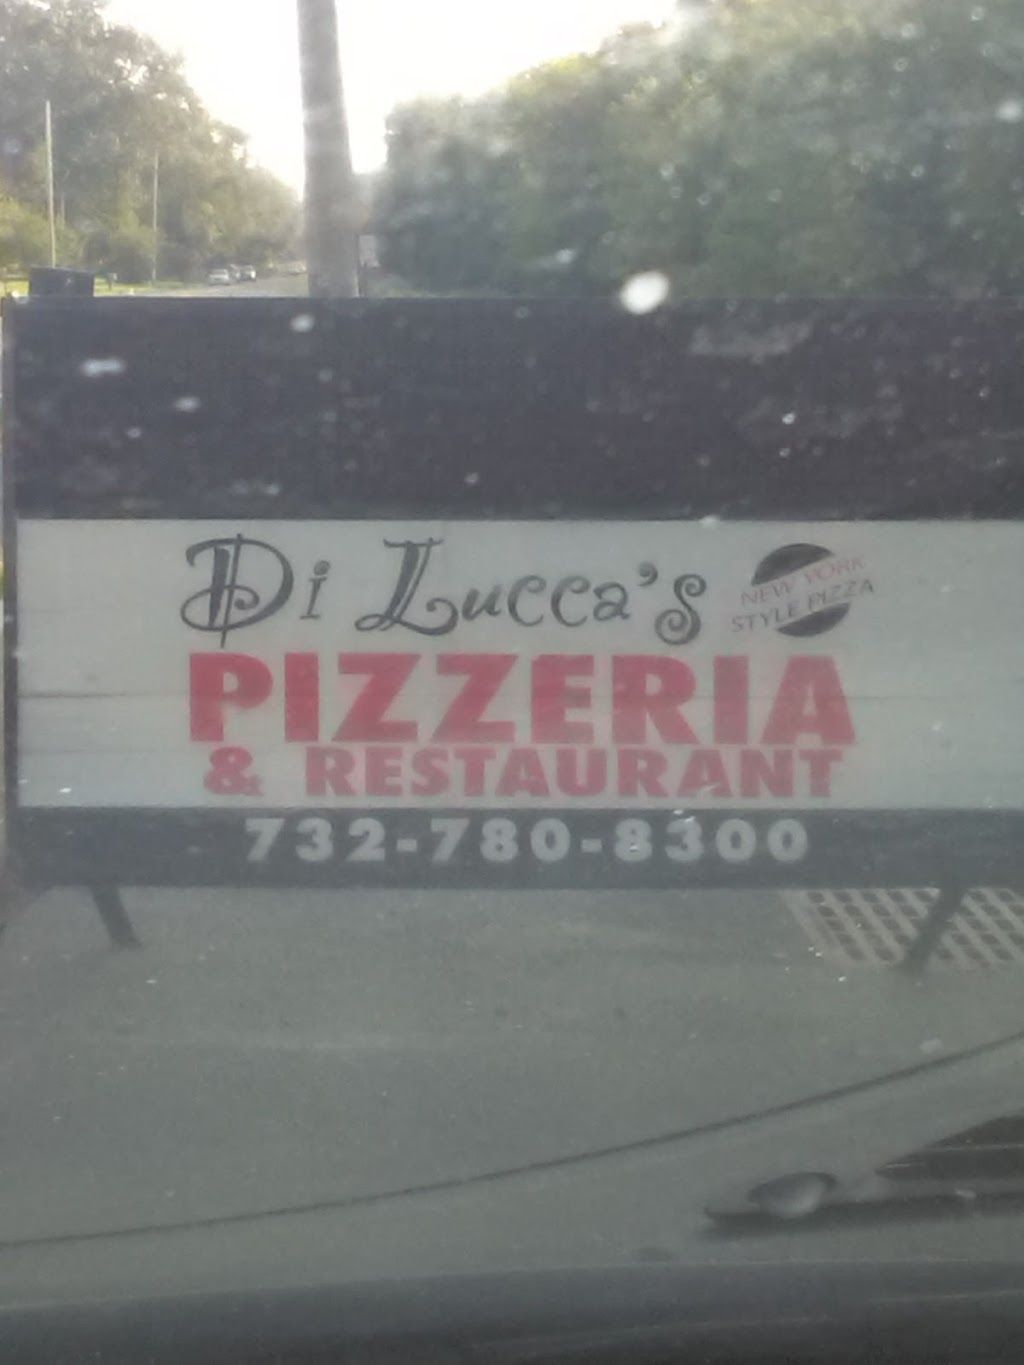 Di Luccas Pizzeria and Restaurant | 274 Monmouth Rd, Millstone, NJ 08510 | Phone: (732) 780-8300